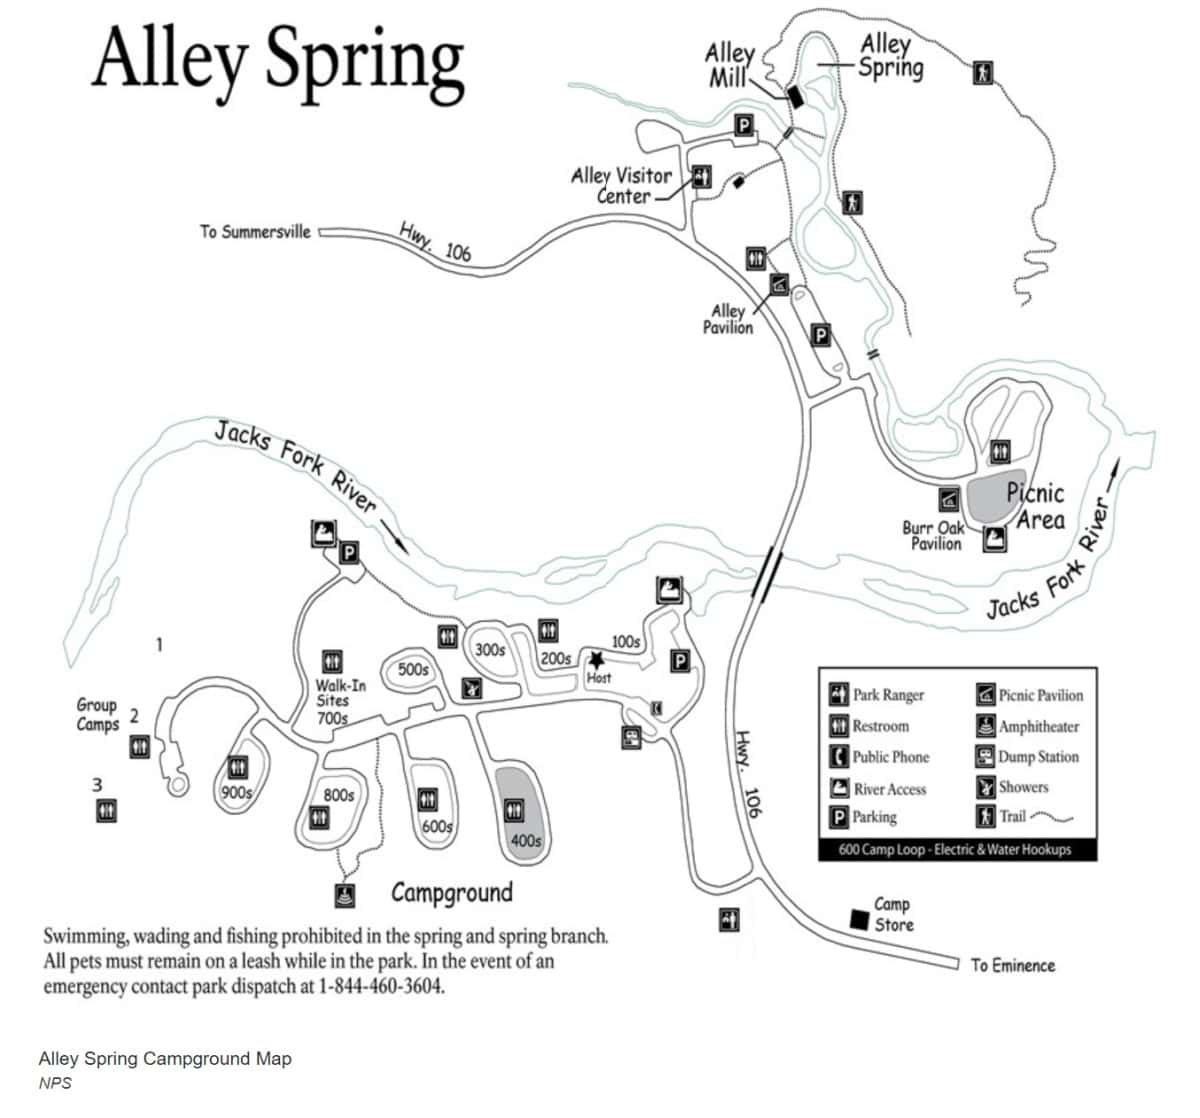 Alley Spring Campground Map